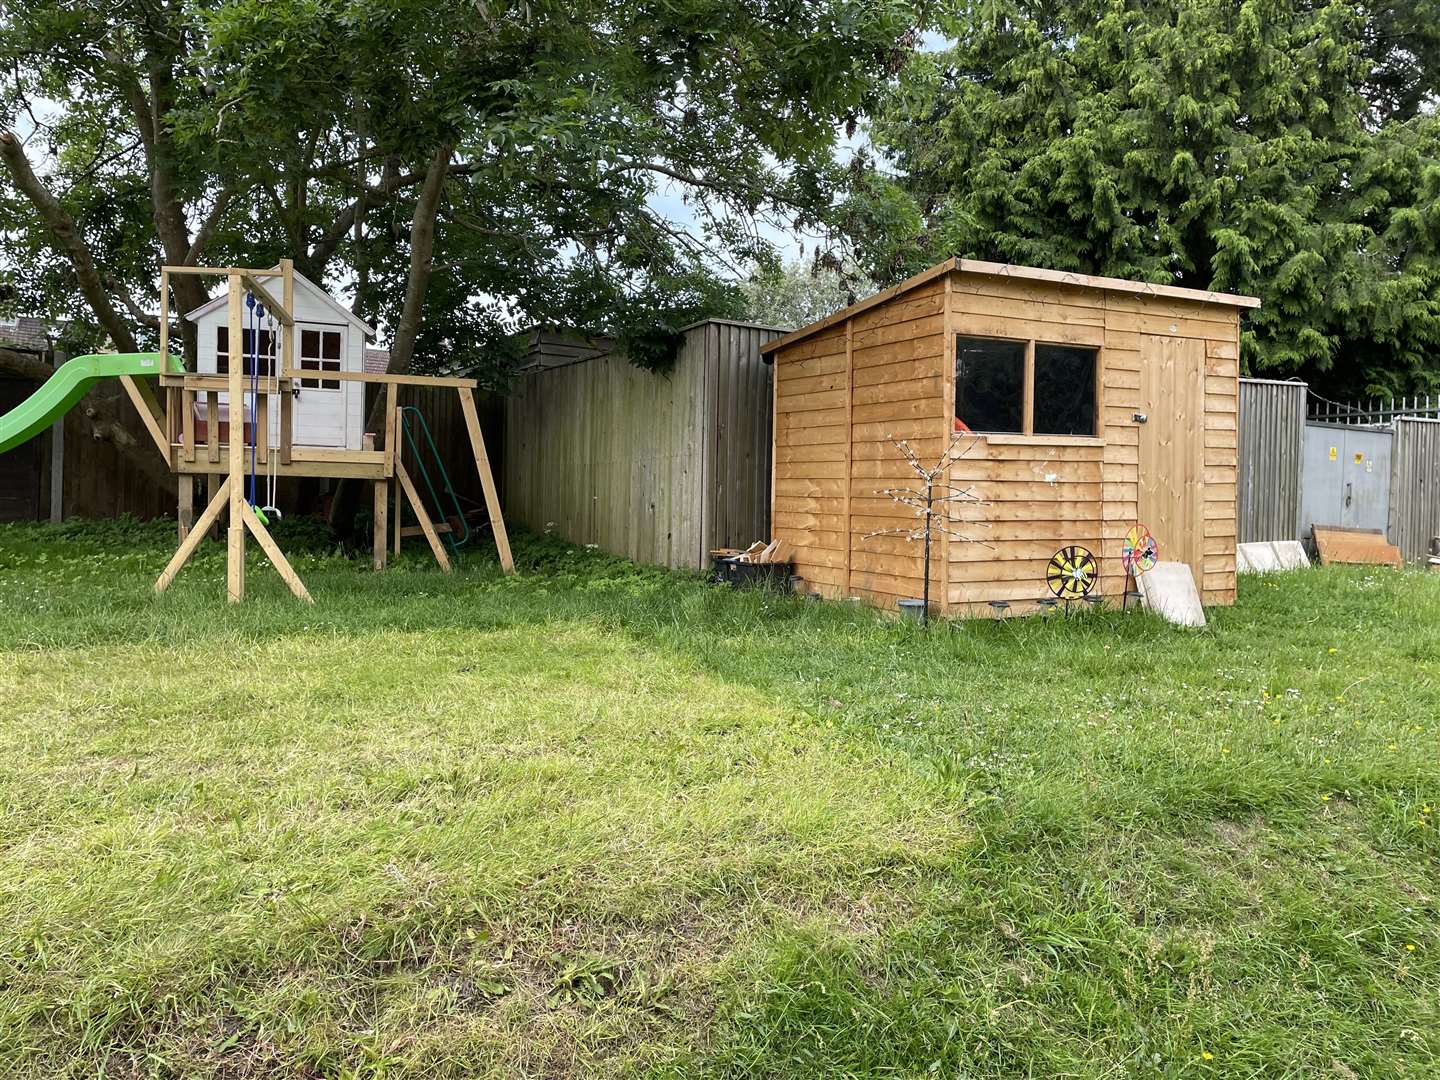 Mr Westwood said that the play house on the left has to be removed, but the shed can stay